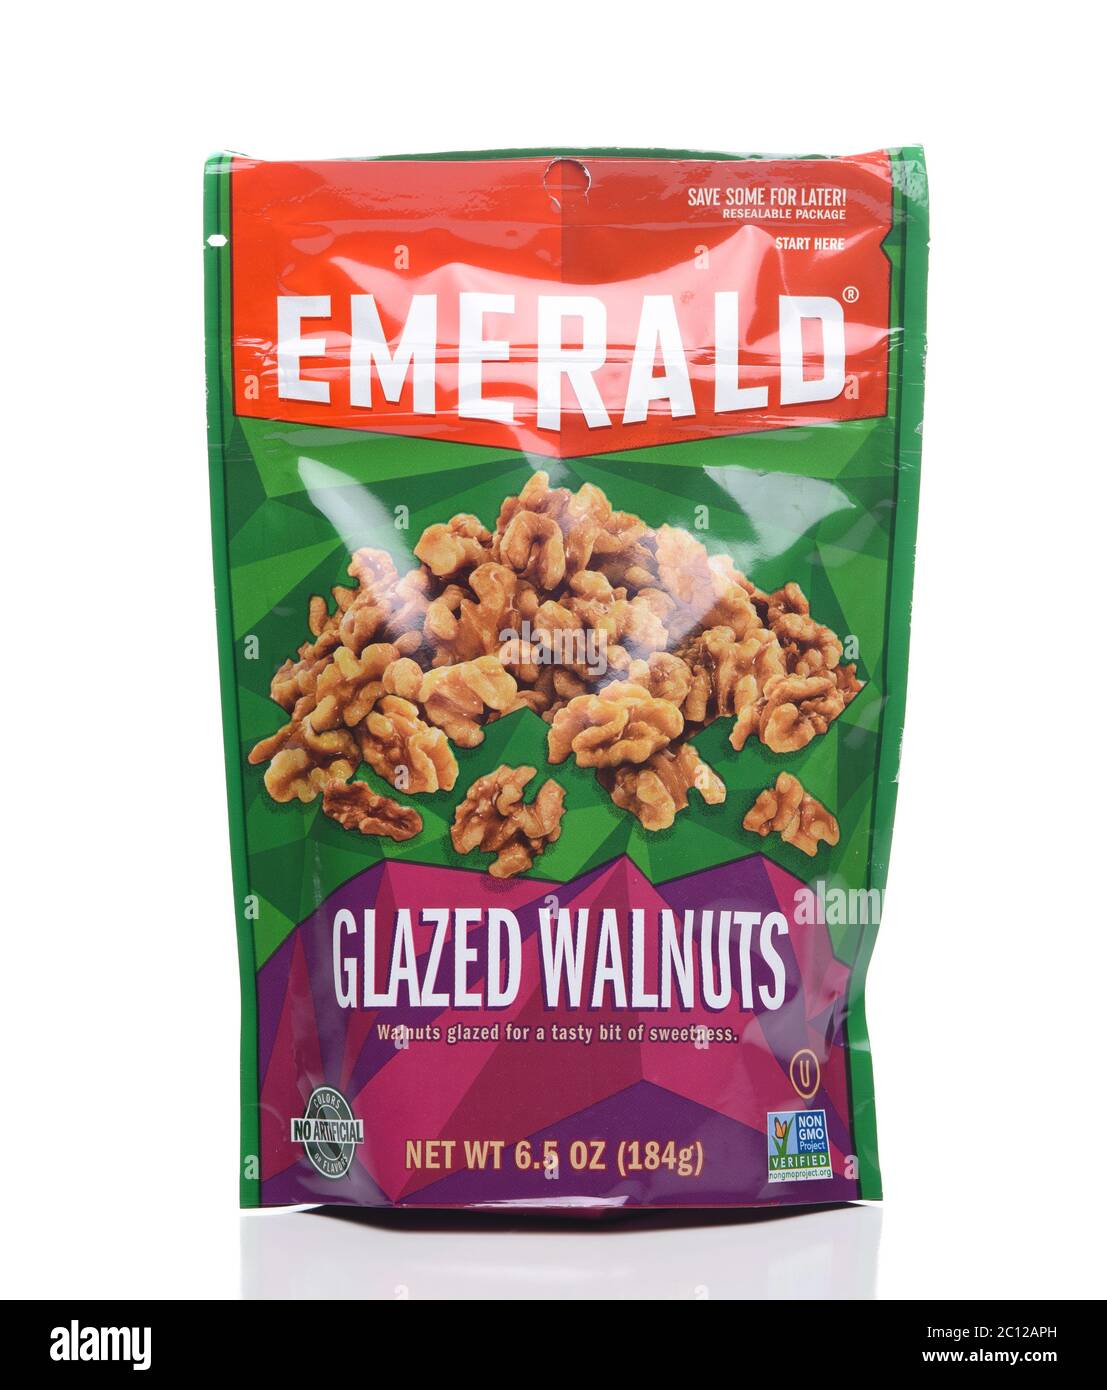 IRVINE, CALIFORNIA - 16 MAY 2020: A package of Emerald Glazed Walnuts for cooking and baking. Stock Photo